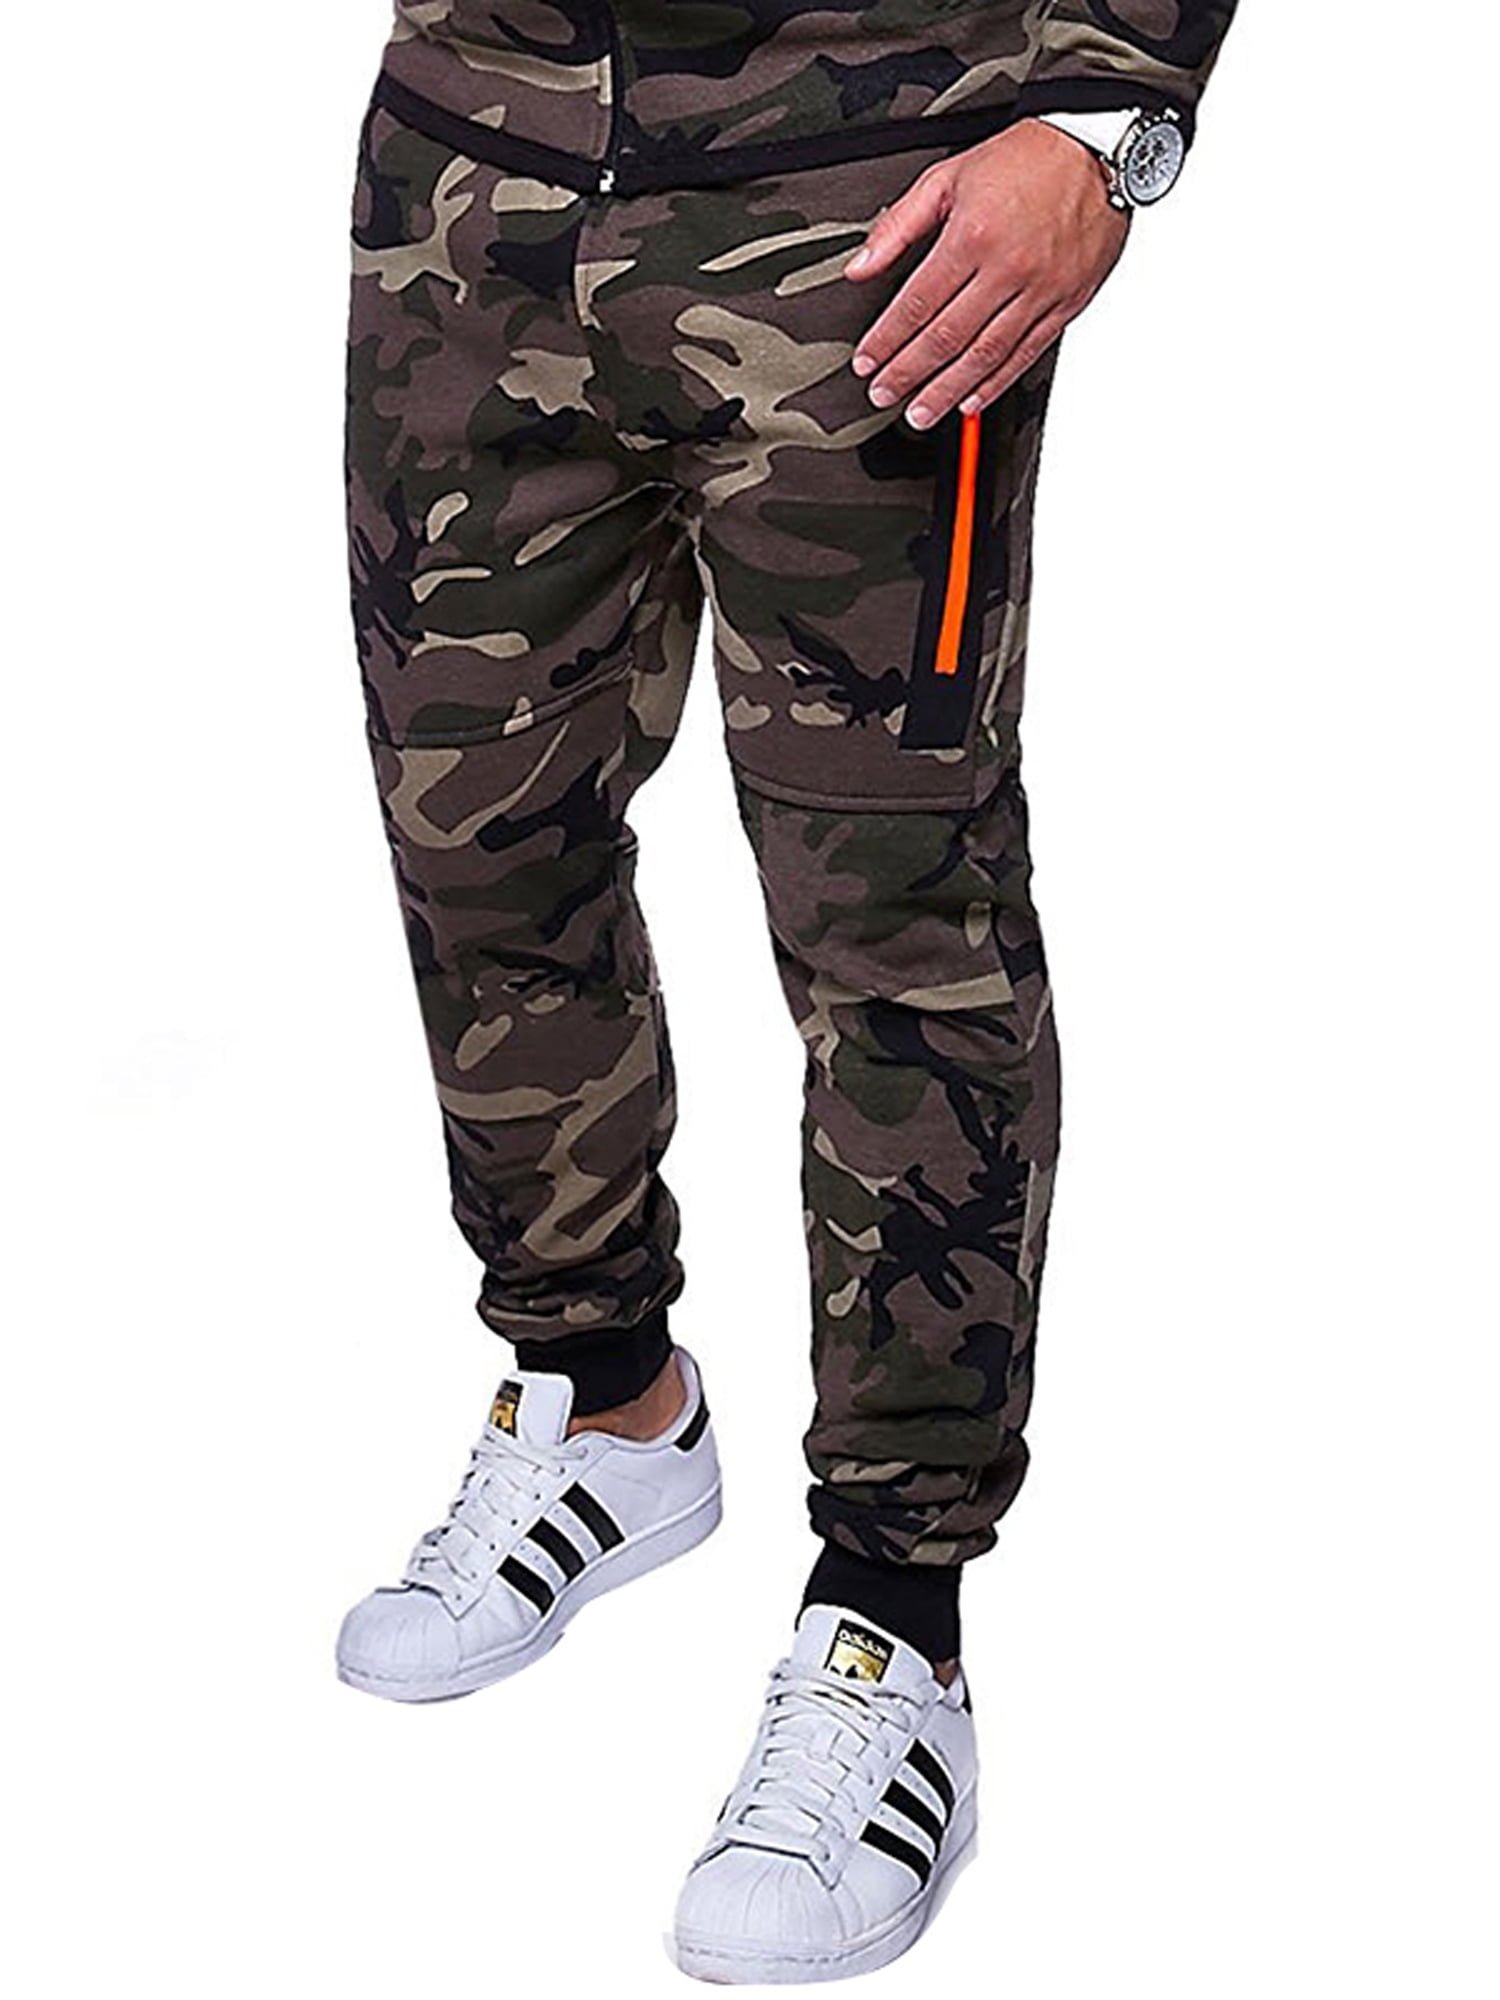 Camouflage Tracksuit Camo Mens Joggers Hoody Fishing Hunting Shooting Real Tree